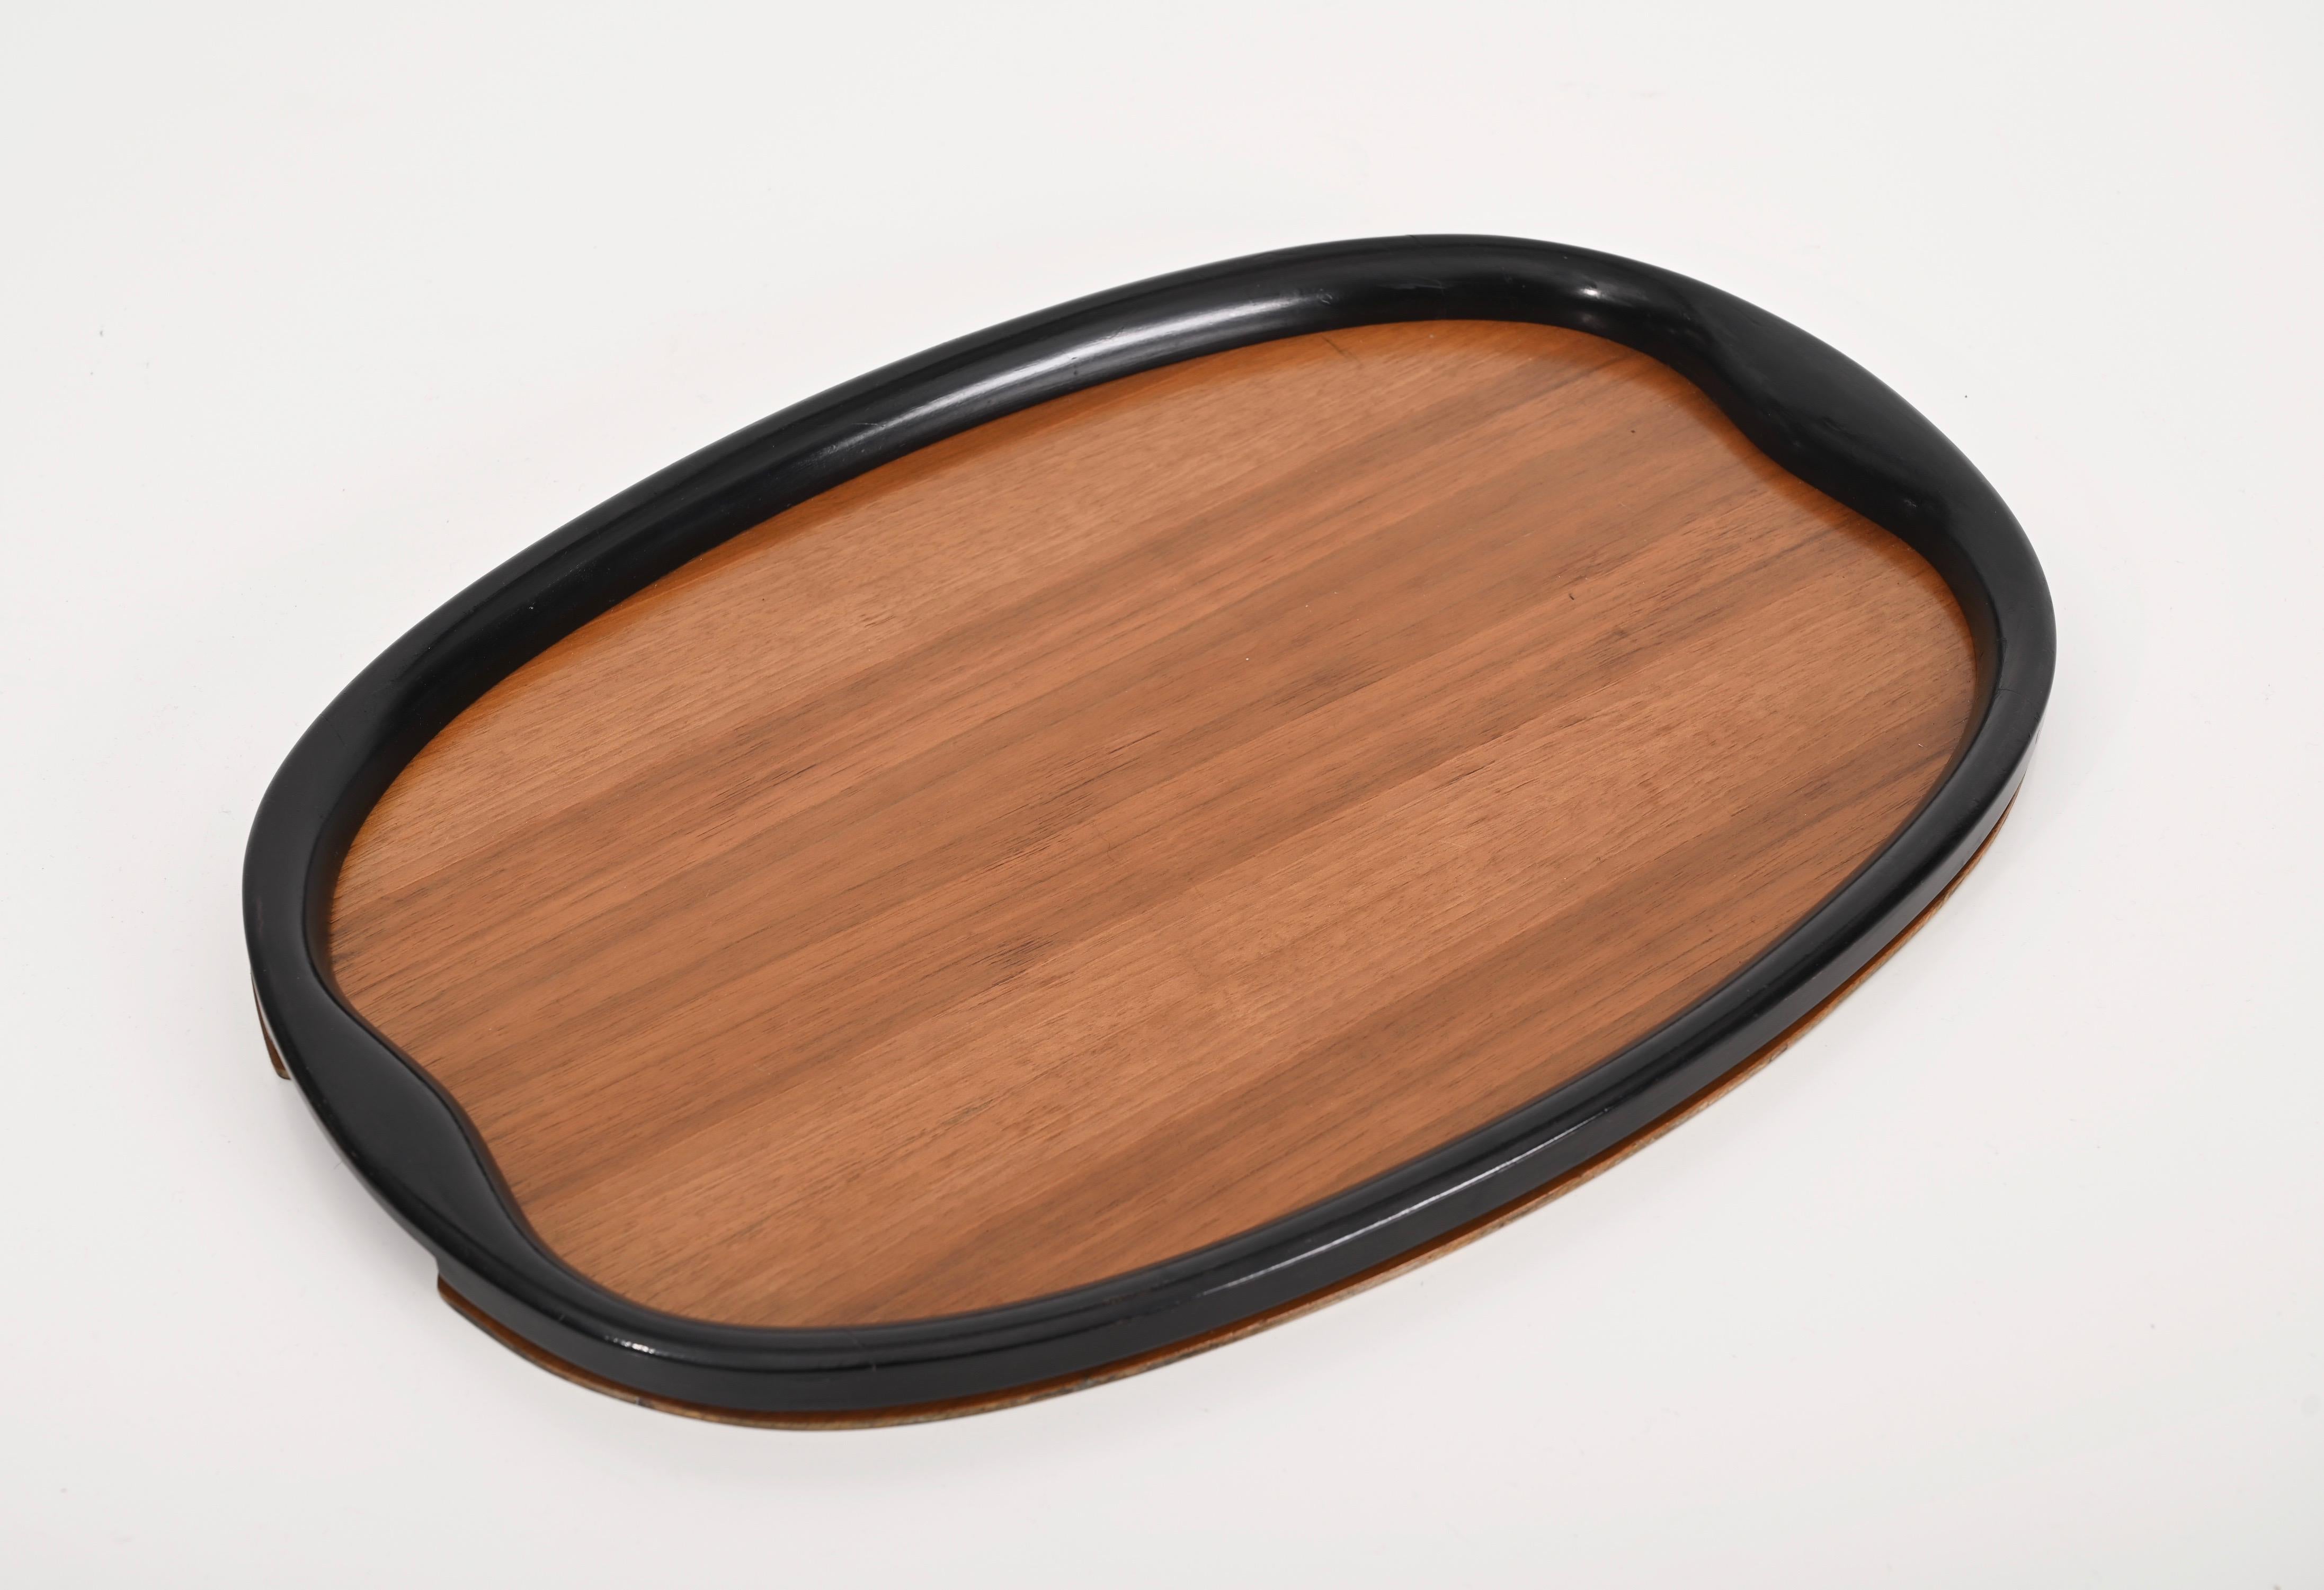 Pair of Art Deco Serving Trays, Ebonized Wood and Walnut, Italy, 1940s For Sale 14